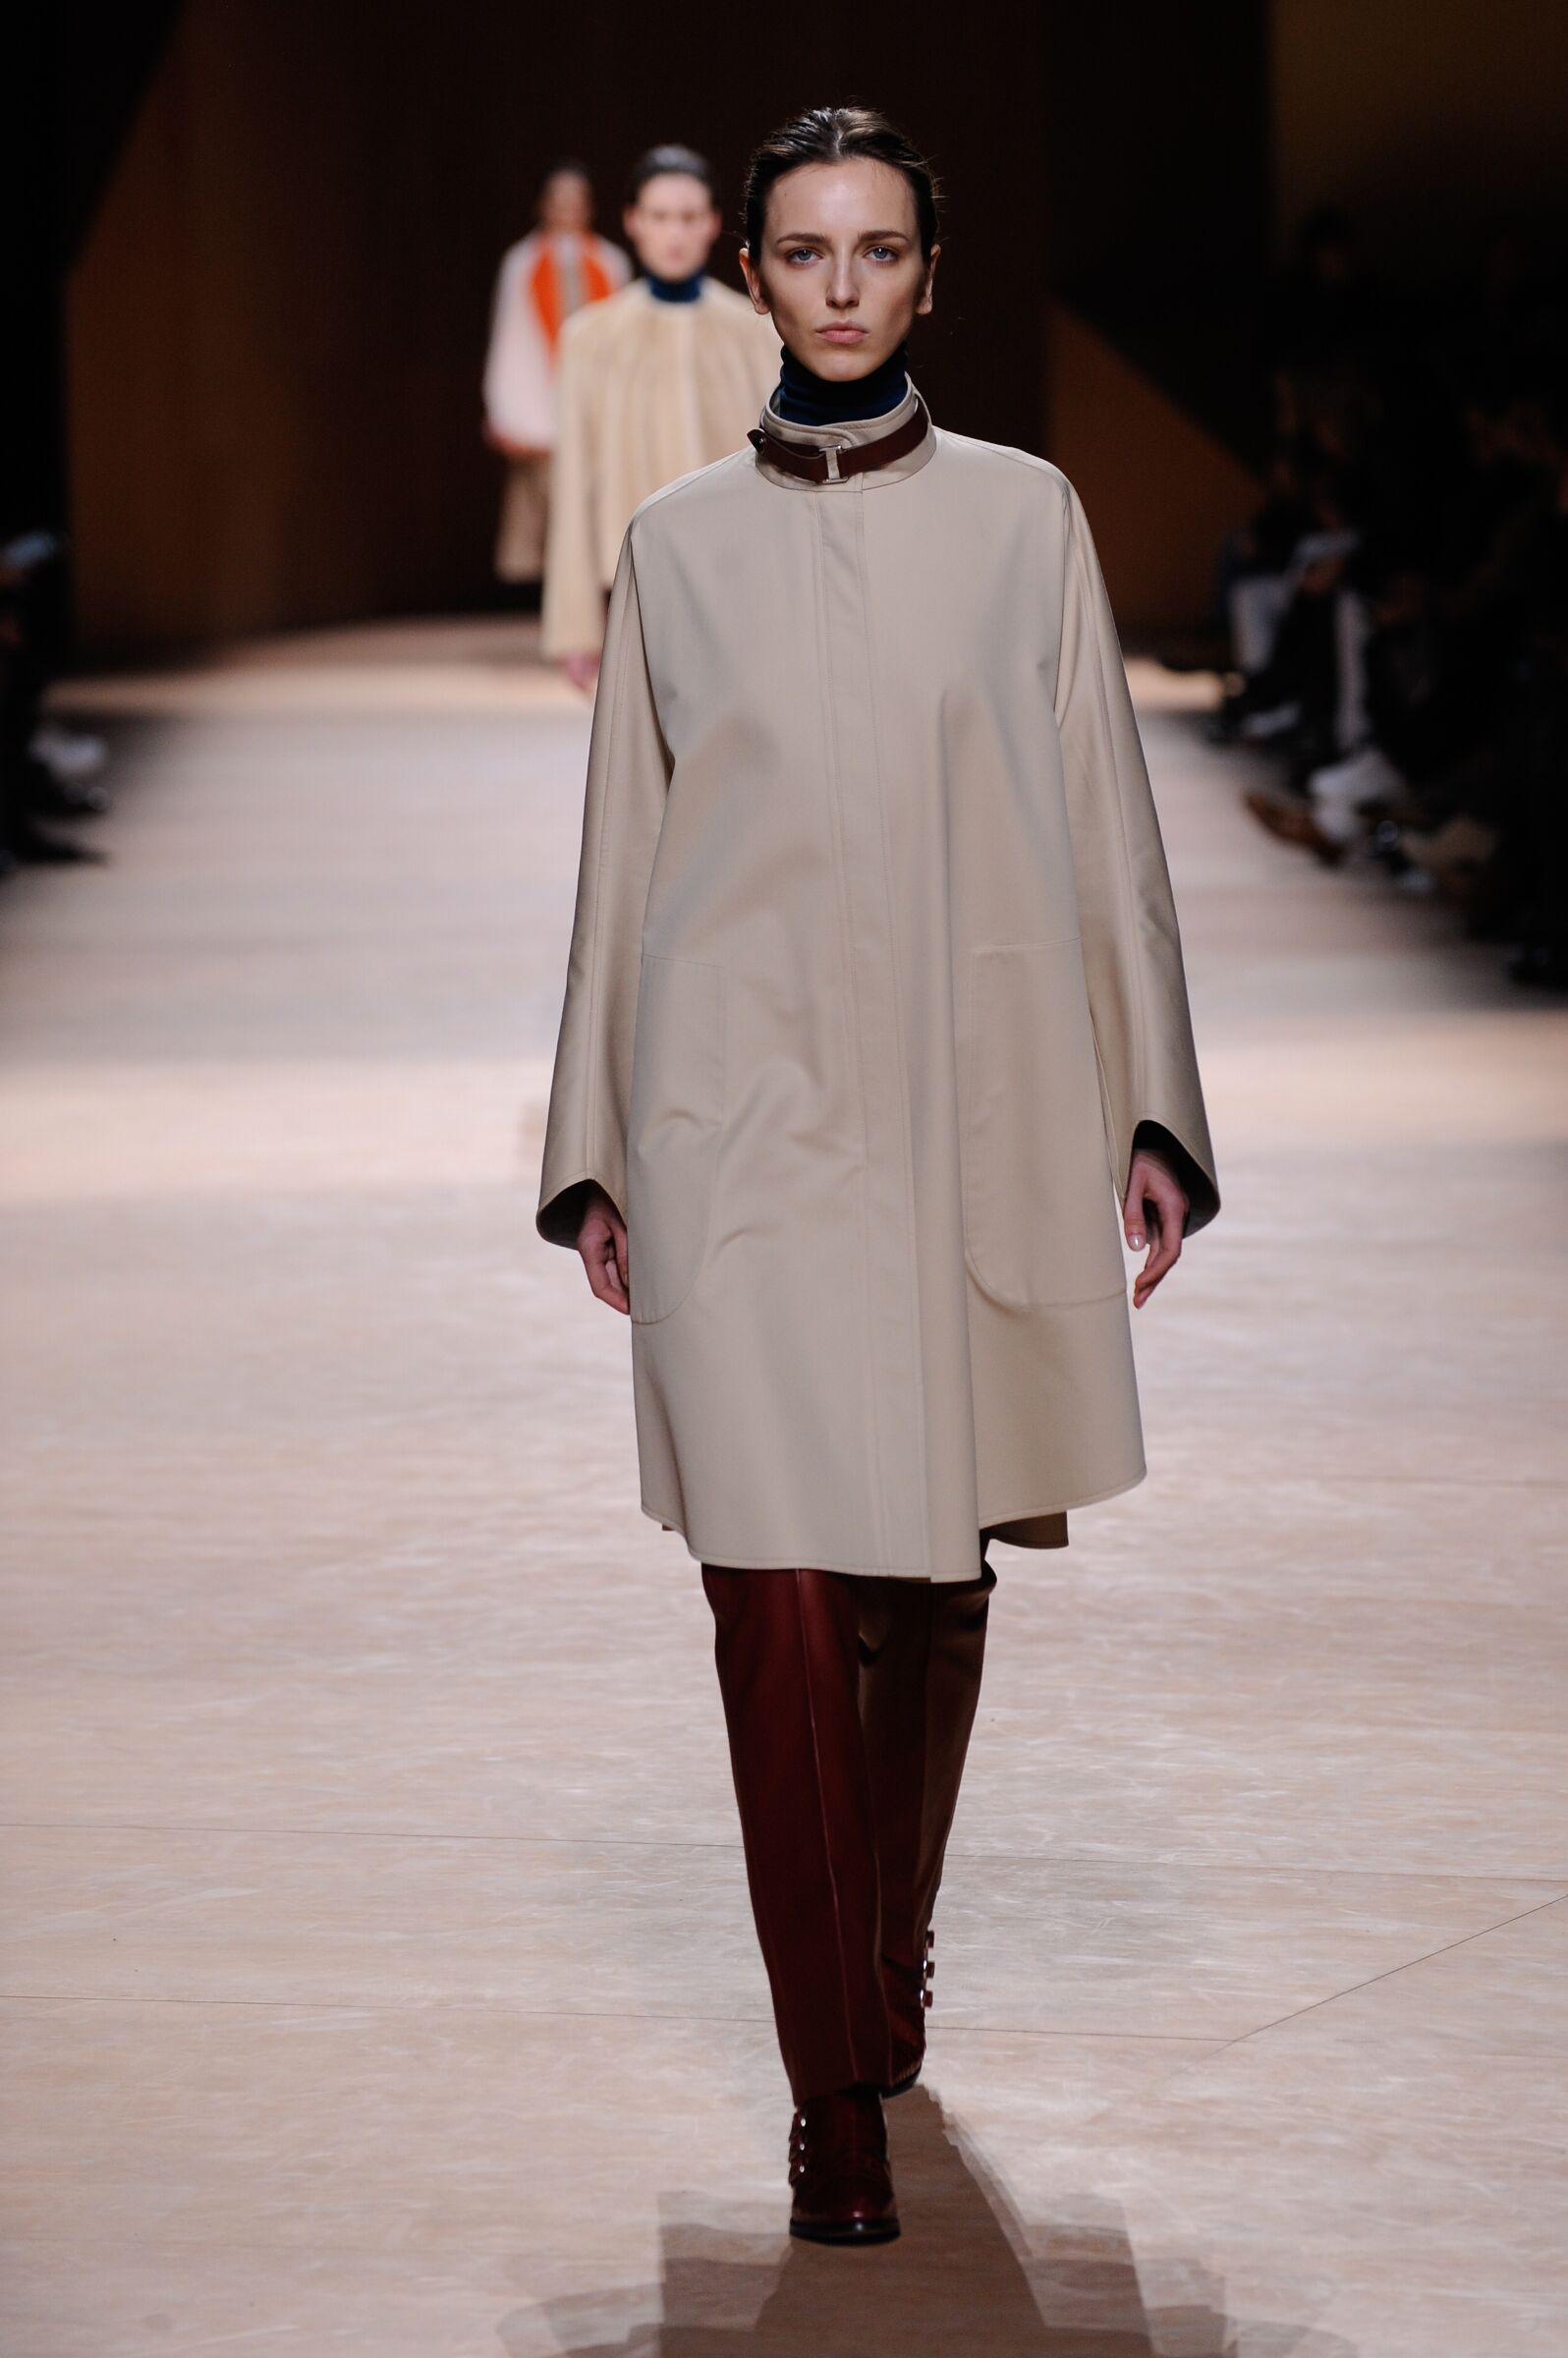 HERMÈS FALL WINTER 2015-16 WOMEN’S COLLECTION | The Skinny ...